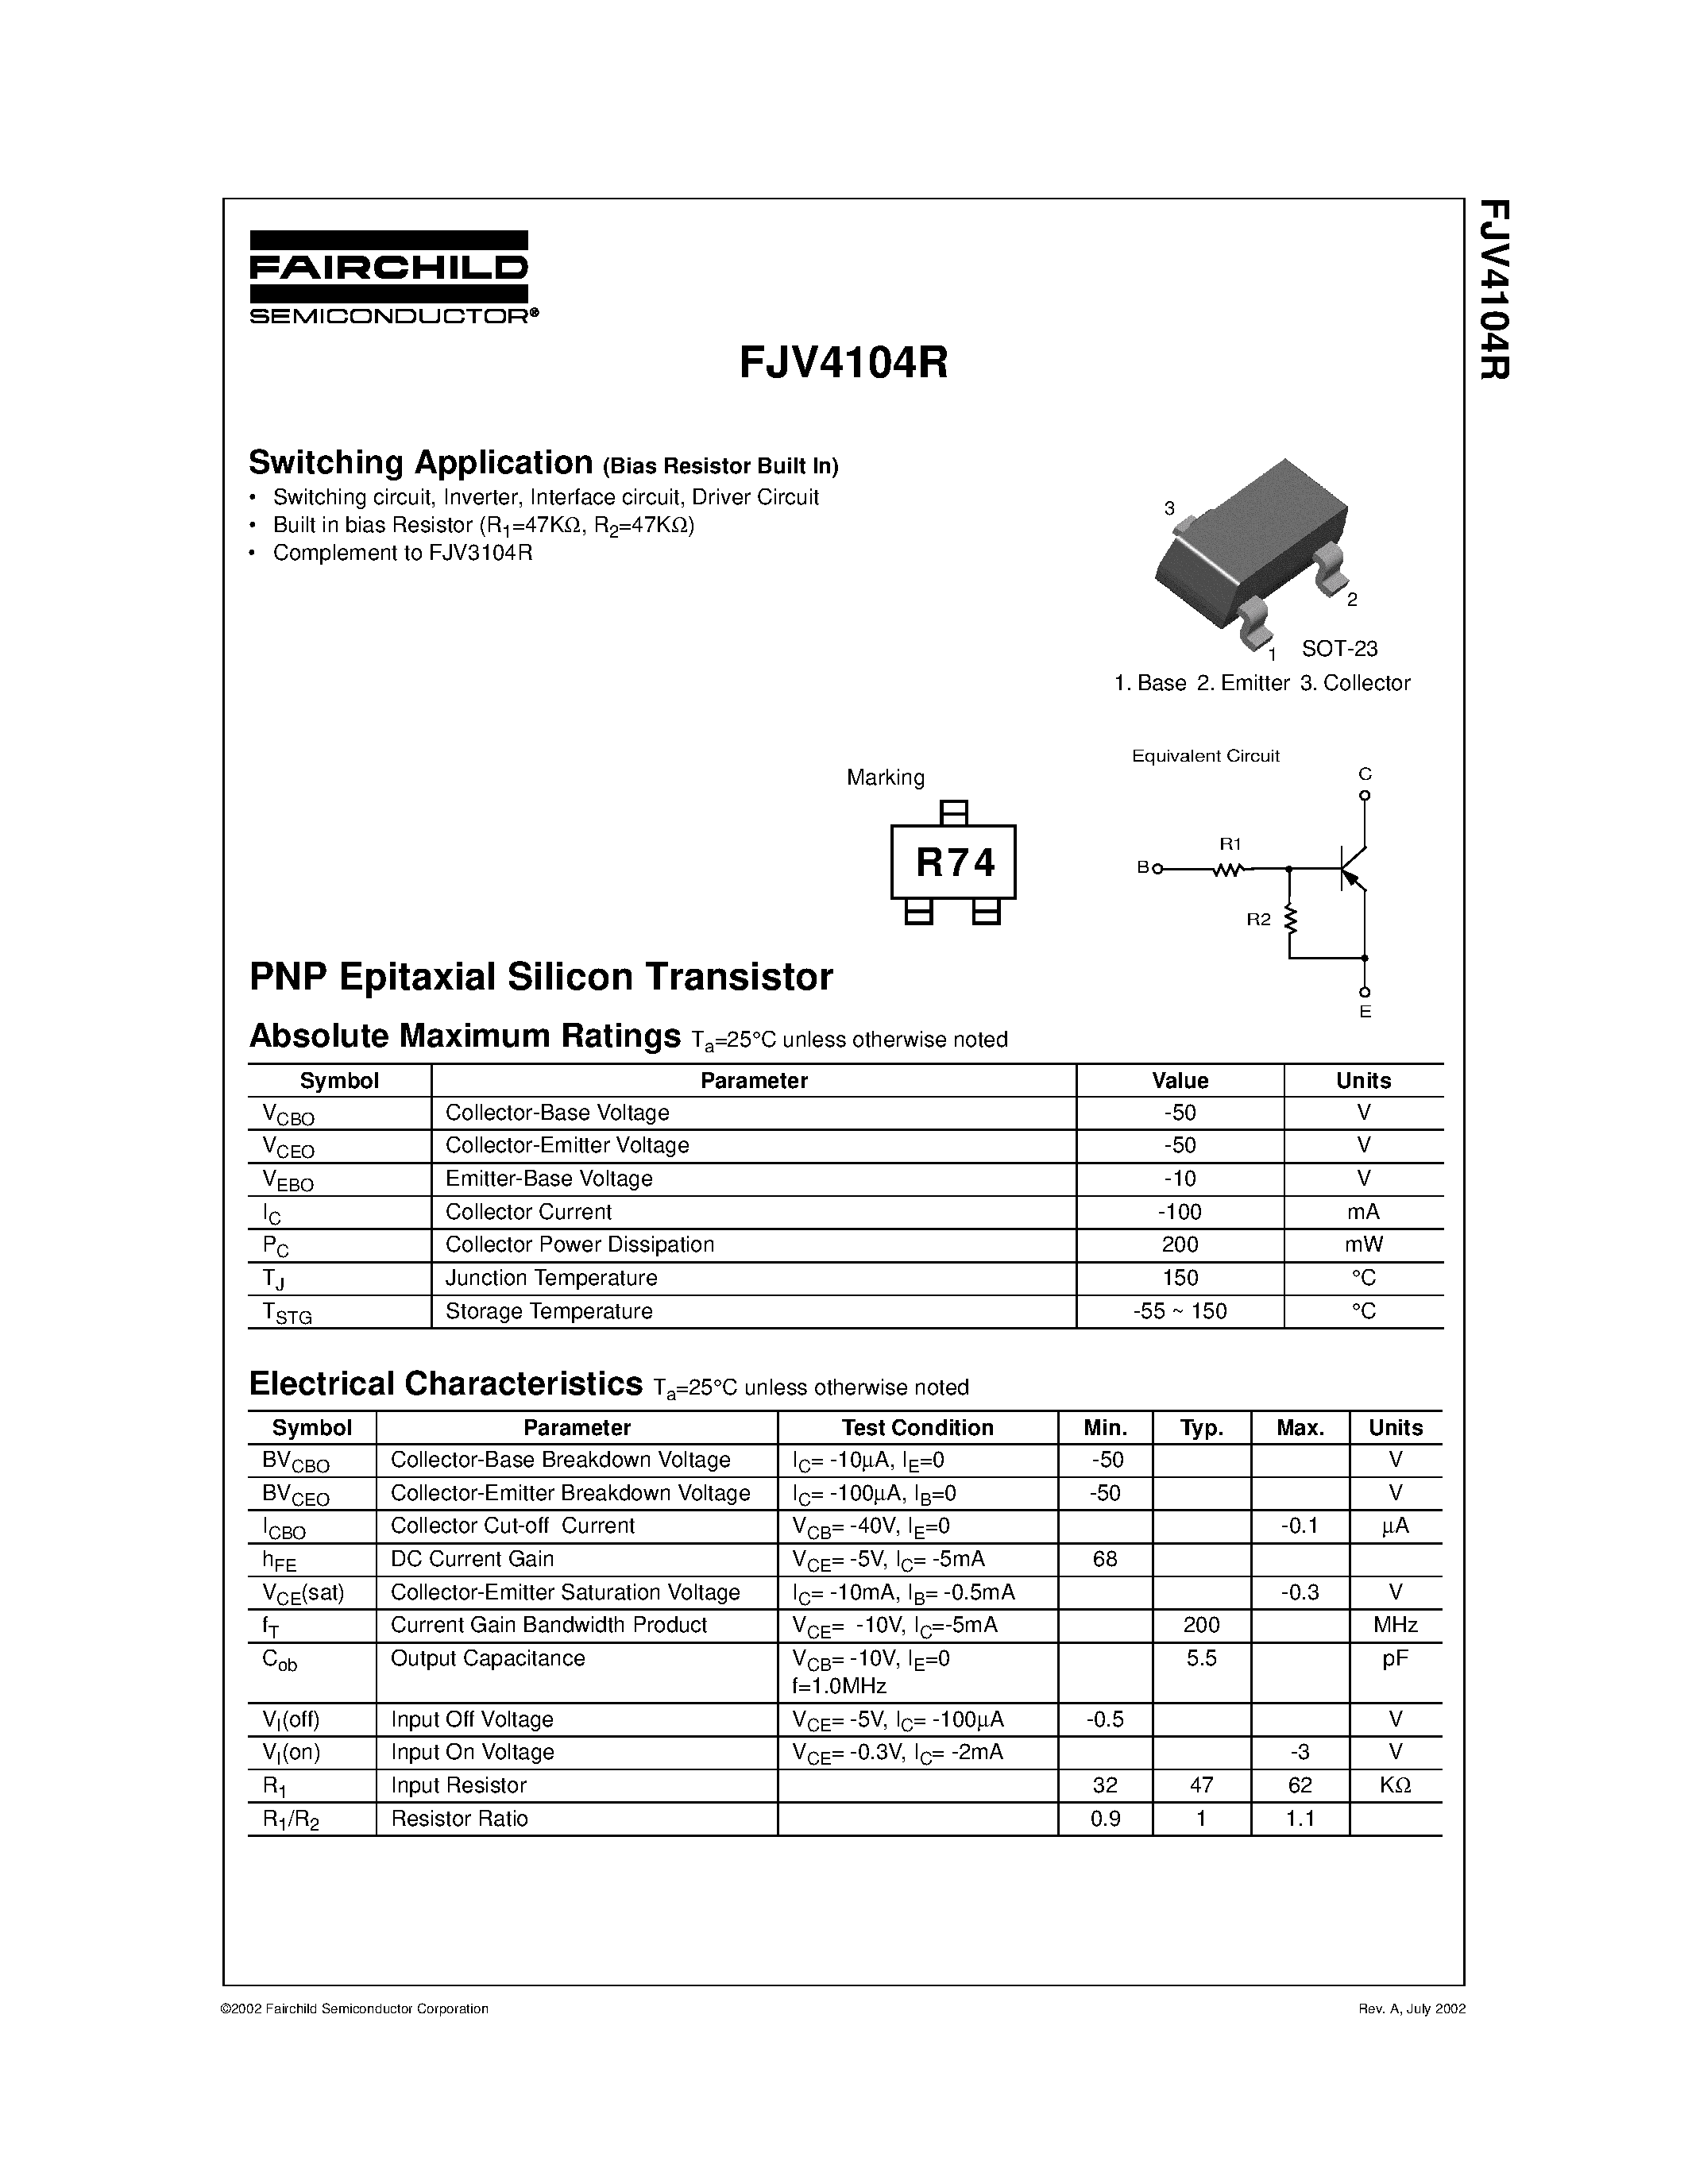 Datasheet FJV4104R - PNP Epitaxial Silicon Transistor page 1